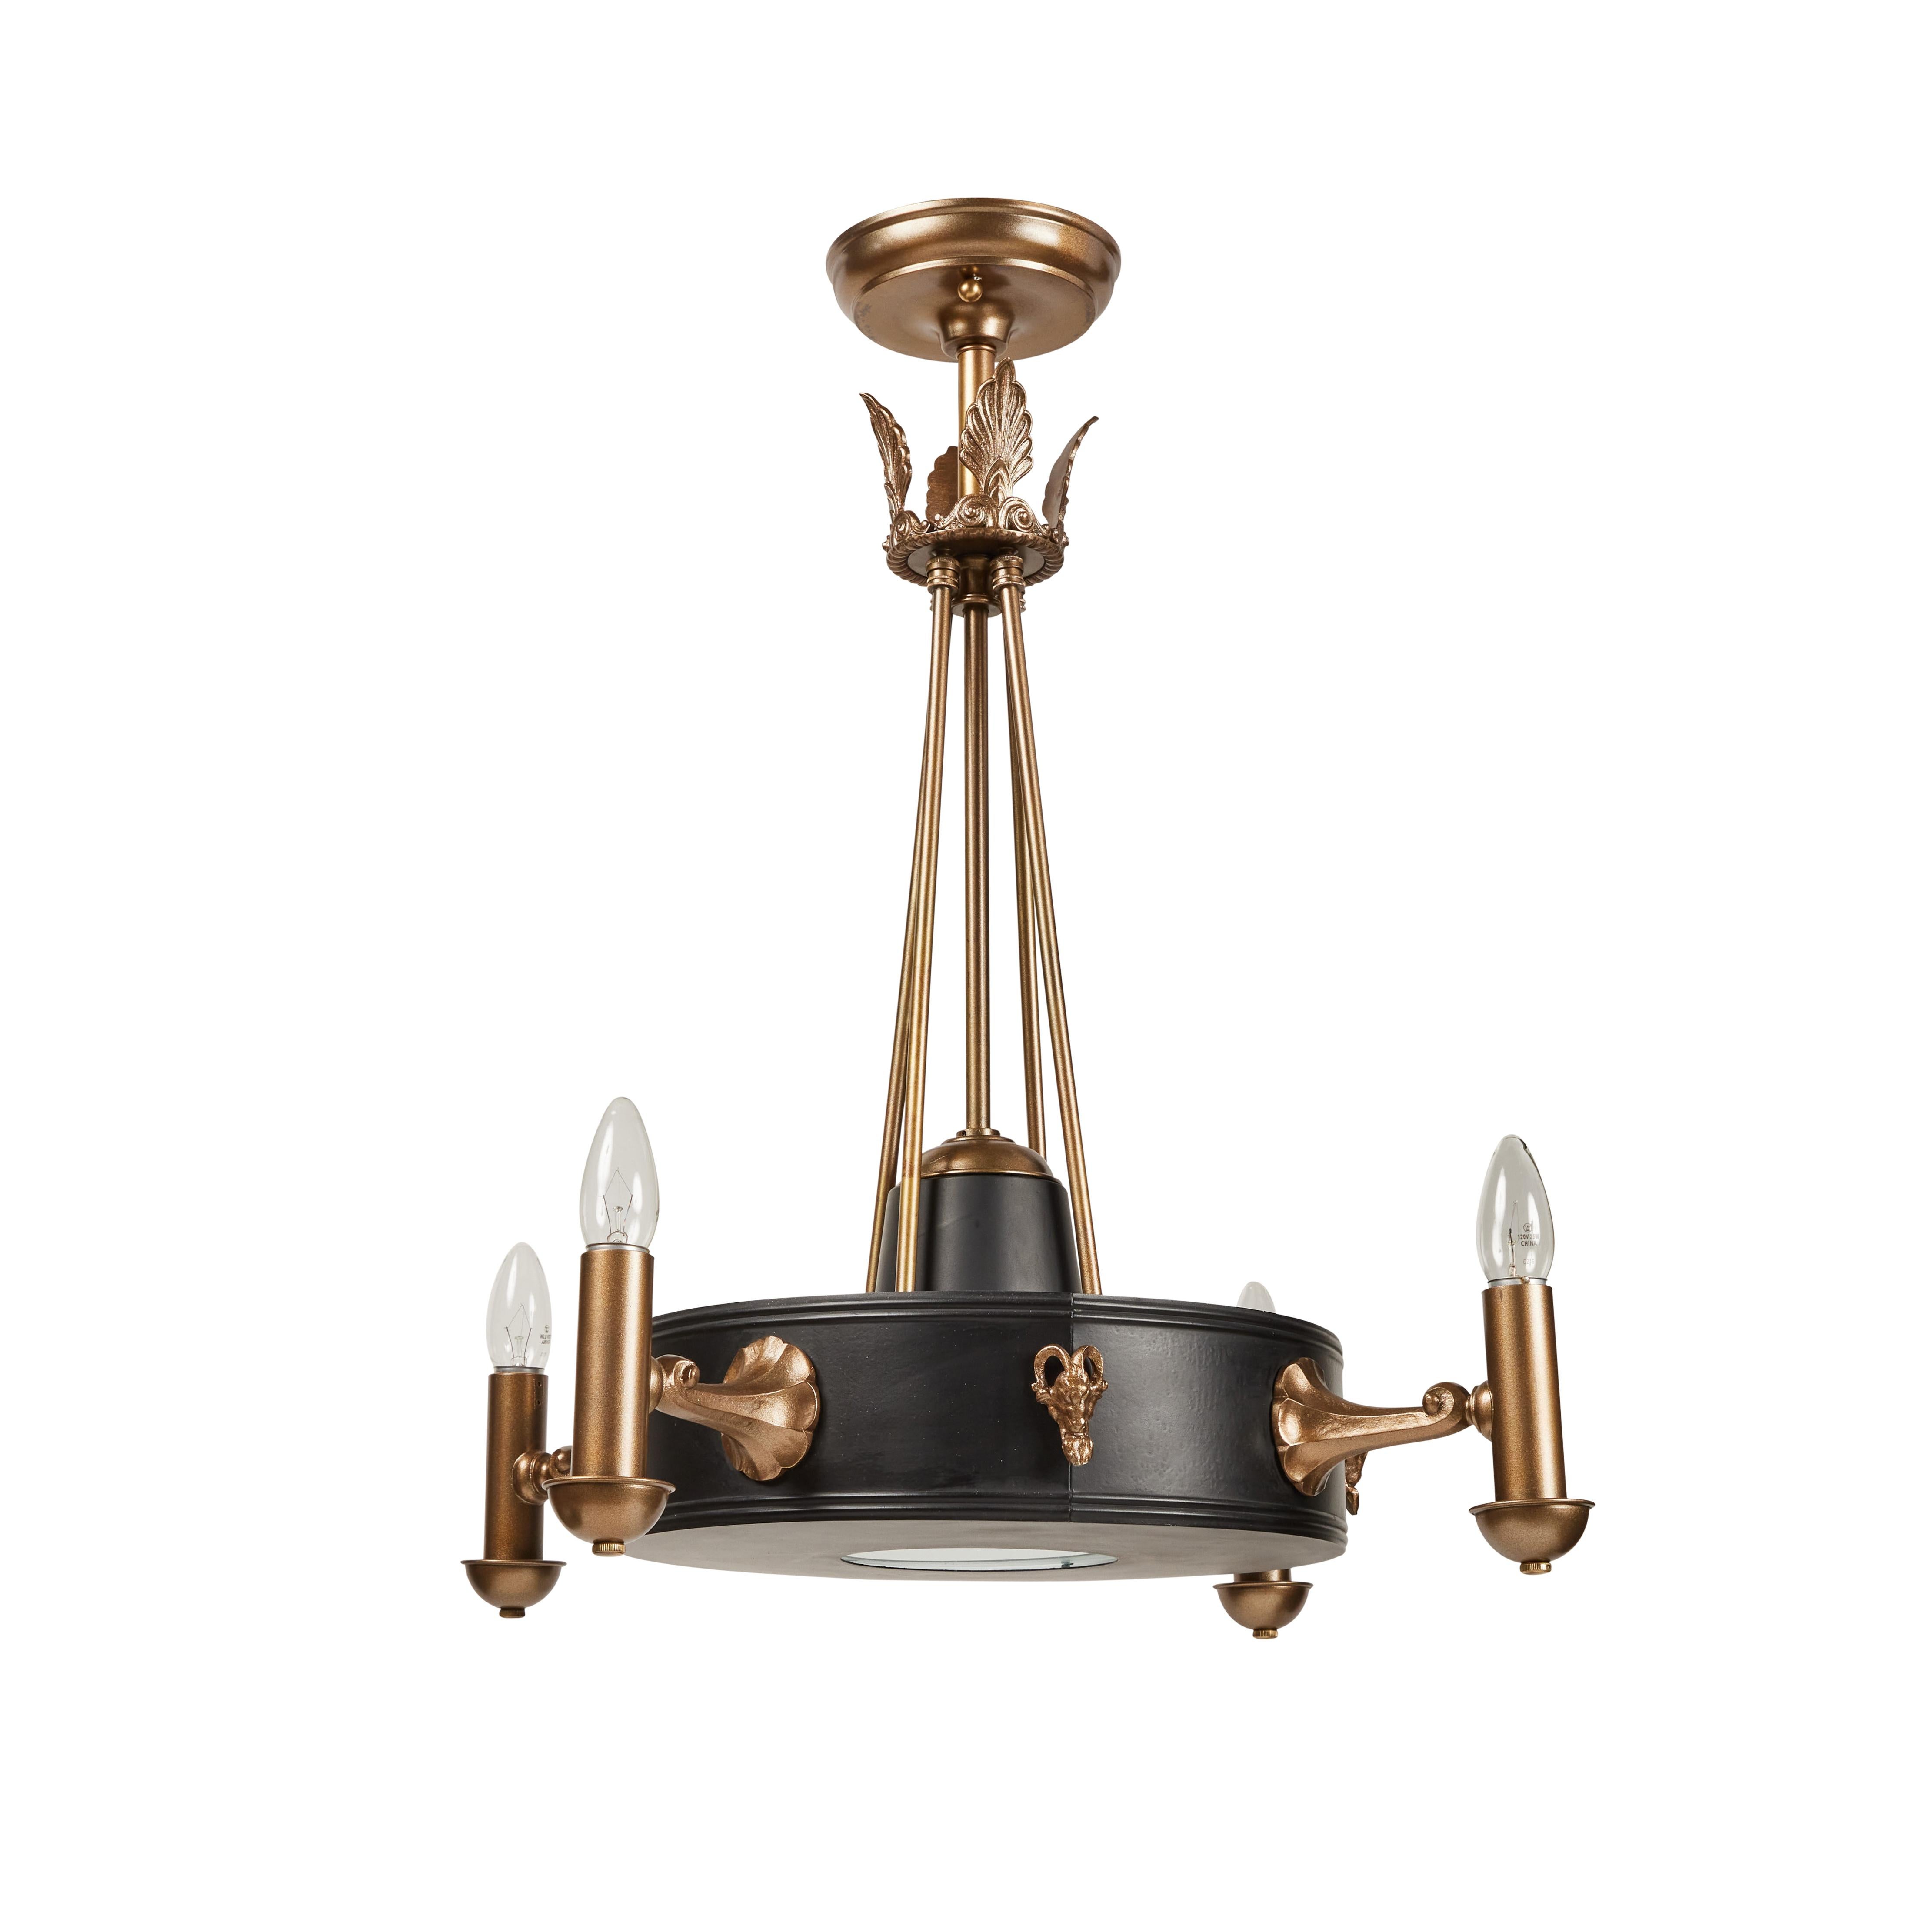 This fixture has been completely restored. The main body has been painted black while all the fittings, arms, canopy and decorative details have been painted in a stately antique brass finish. It has 4 lighted arms and an interior light source in